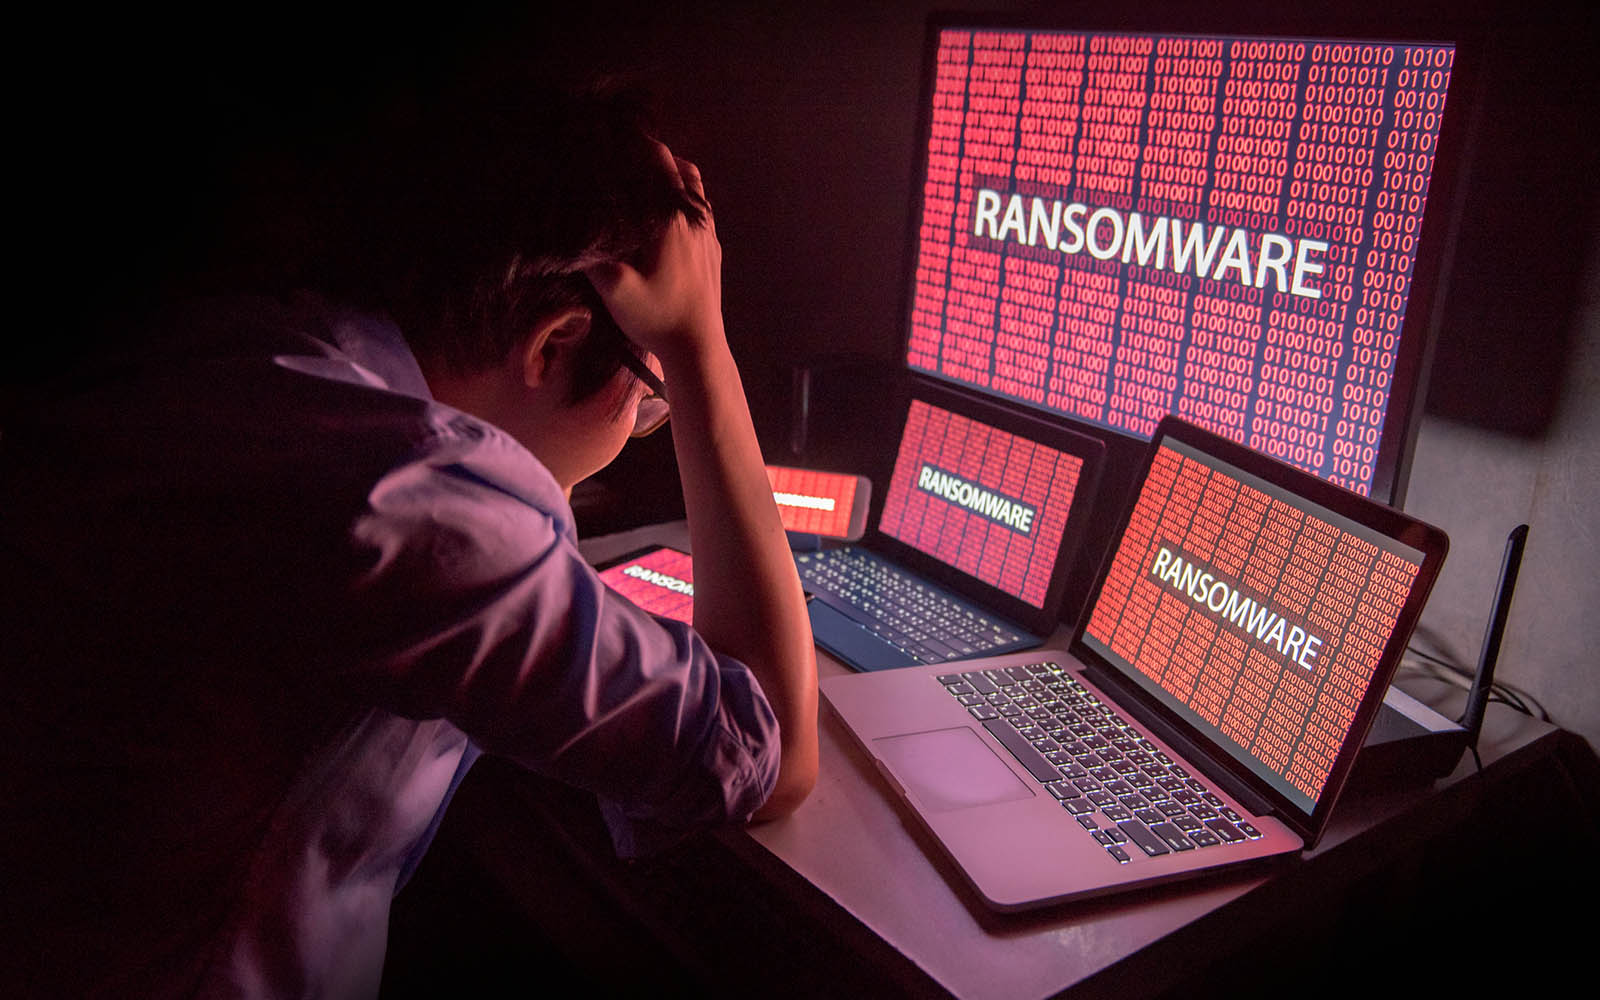 Local government agency ransomware attacks